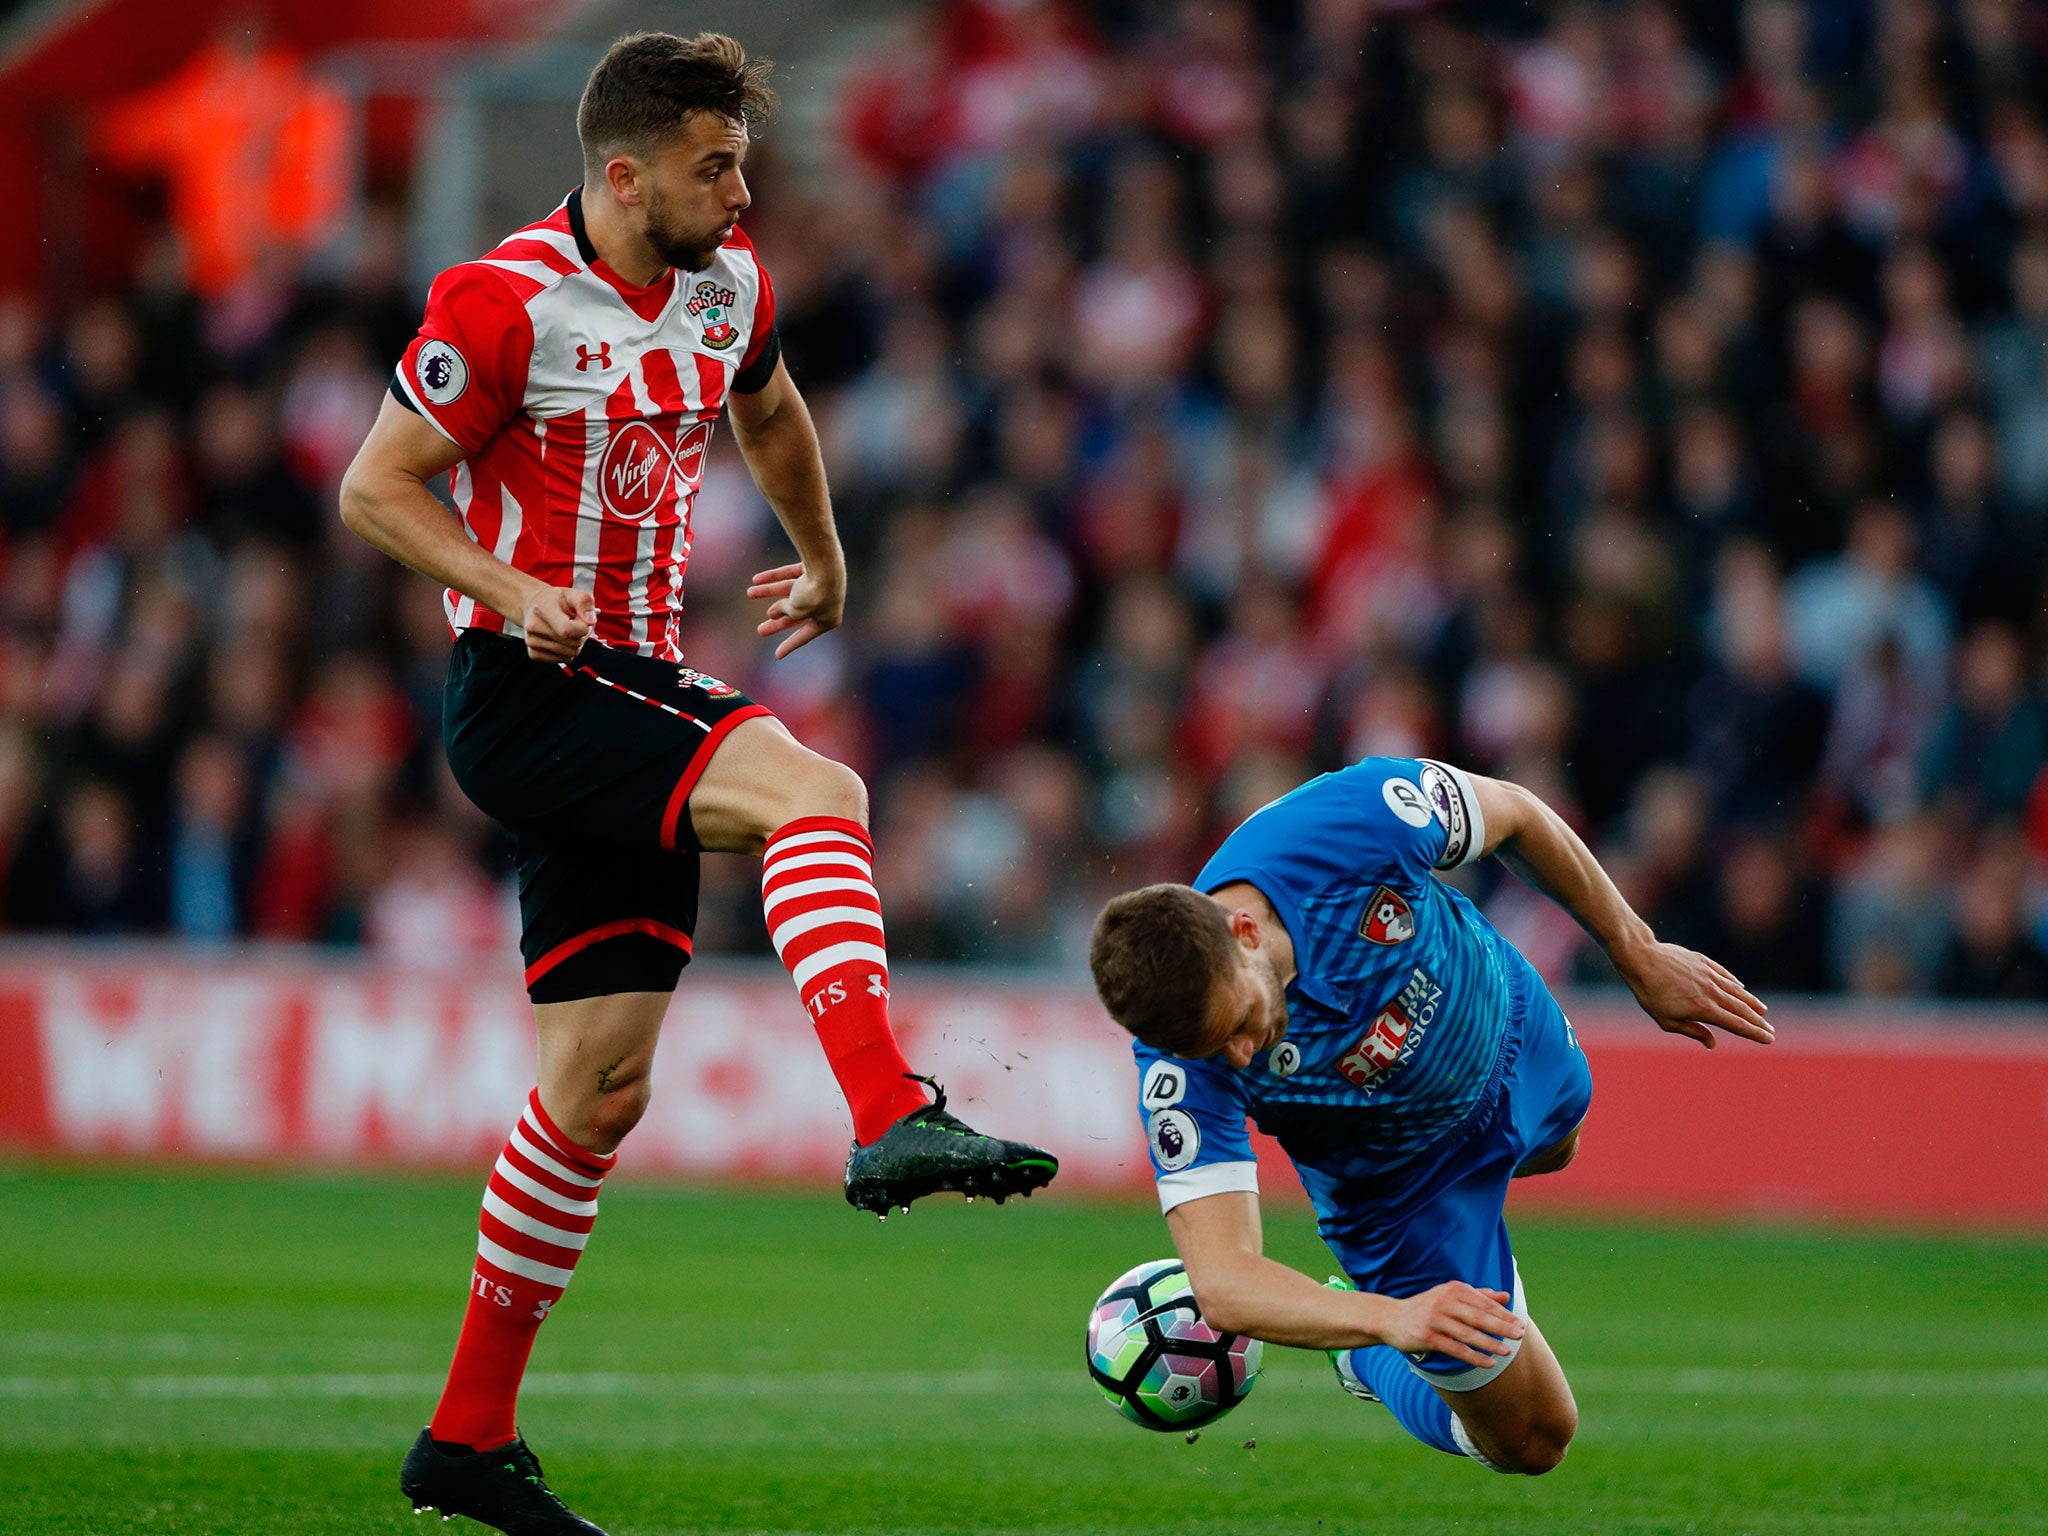 Jay Rodriguez in action for Southampton last season